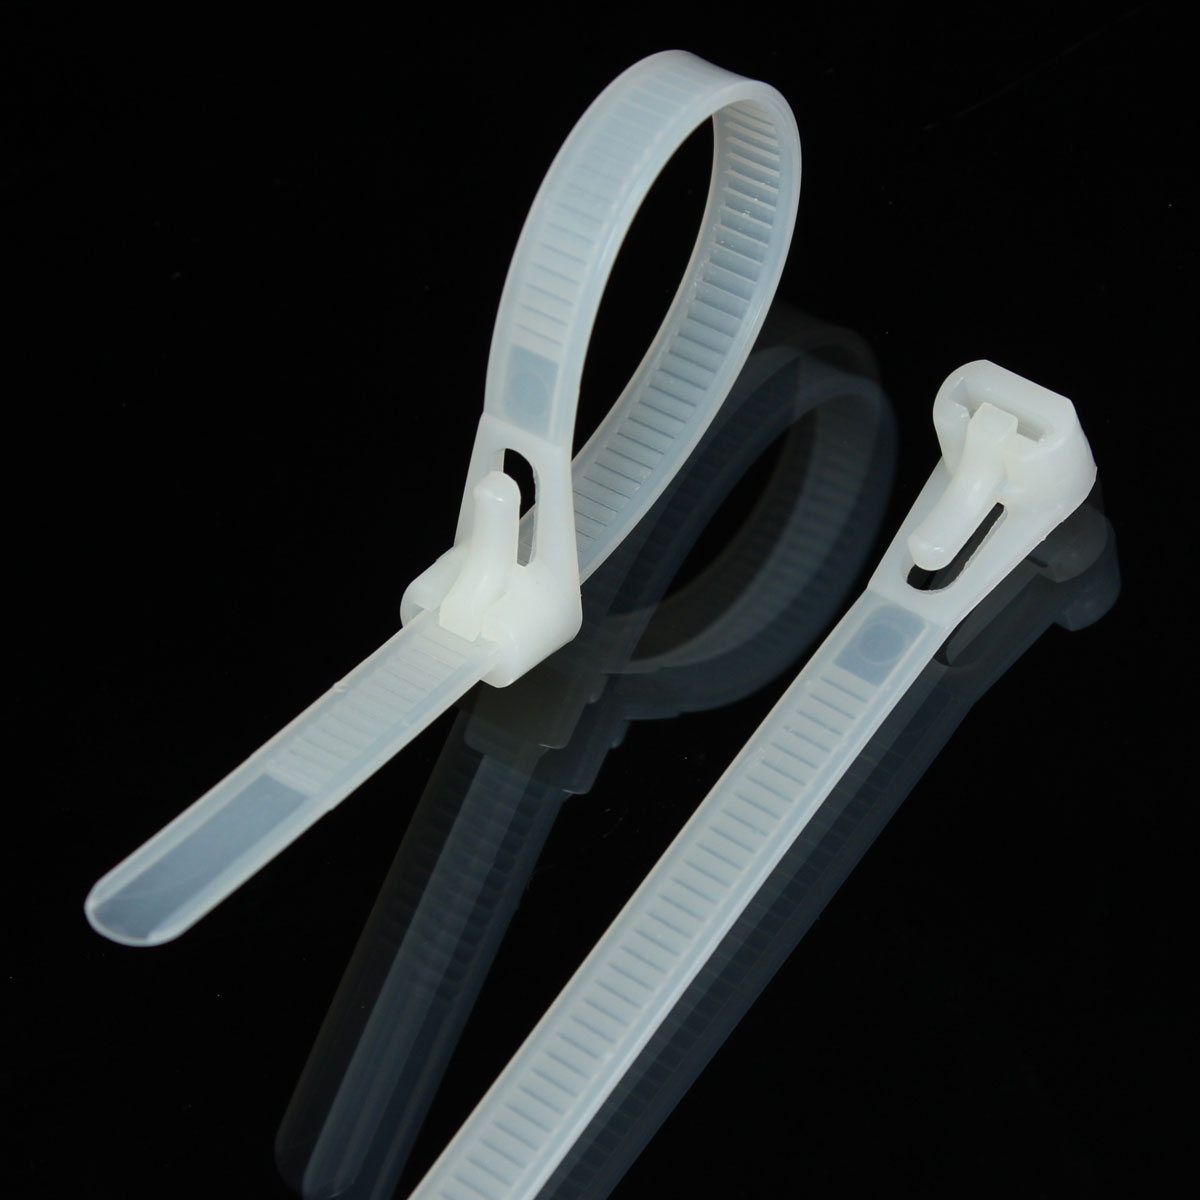 Sulevetrade-ZT06-100pcs-Releasable-Nylon-Cable-Core-Wire-Zip-Ties-Strap-Strips-150200300mm-Length-1010727